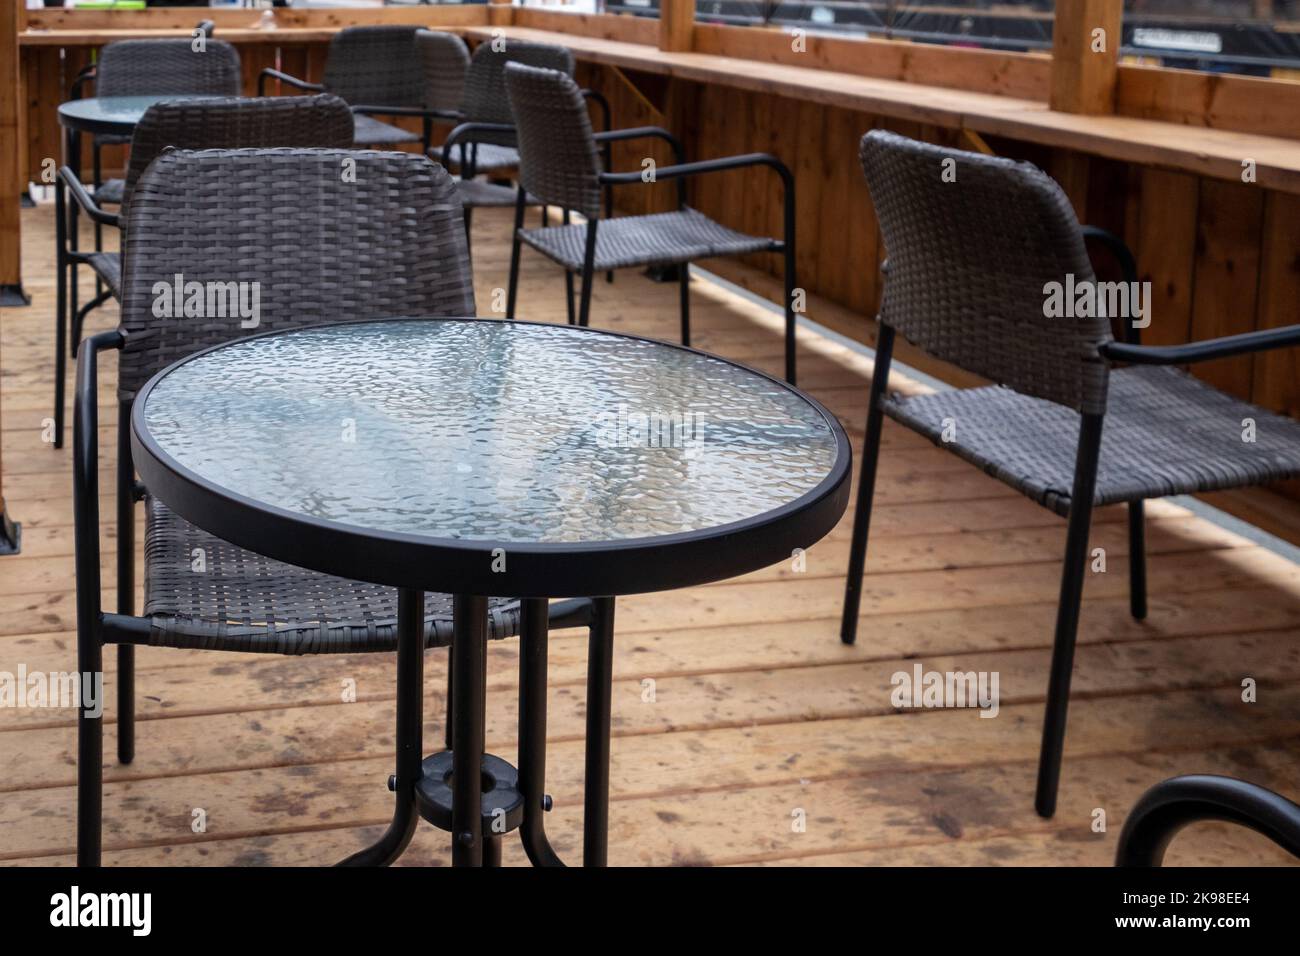 Multiple empty black metal tables with round glass tops and black rattan chairs on a sidewalk cafe patio of an outdoor restaurant. Stock Photo